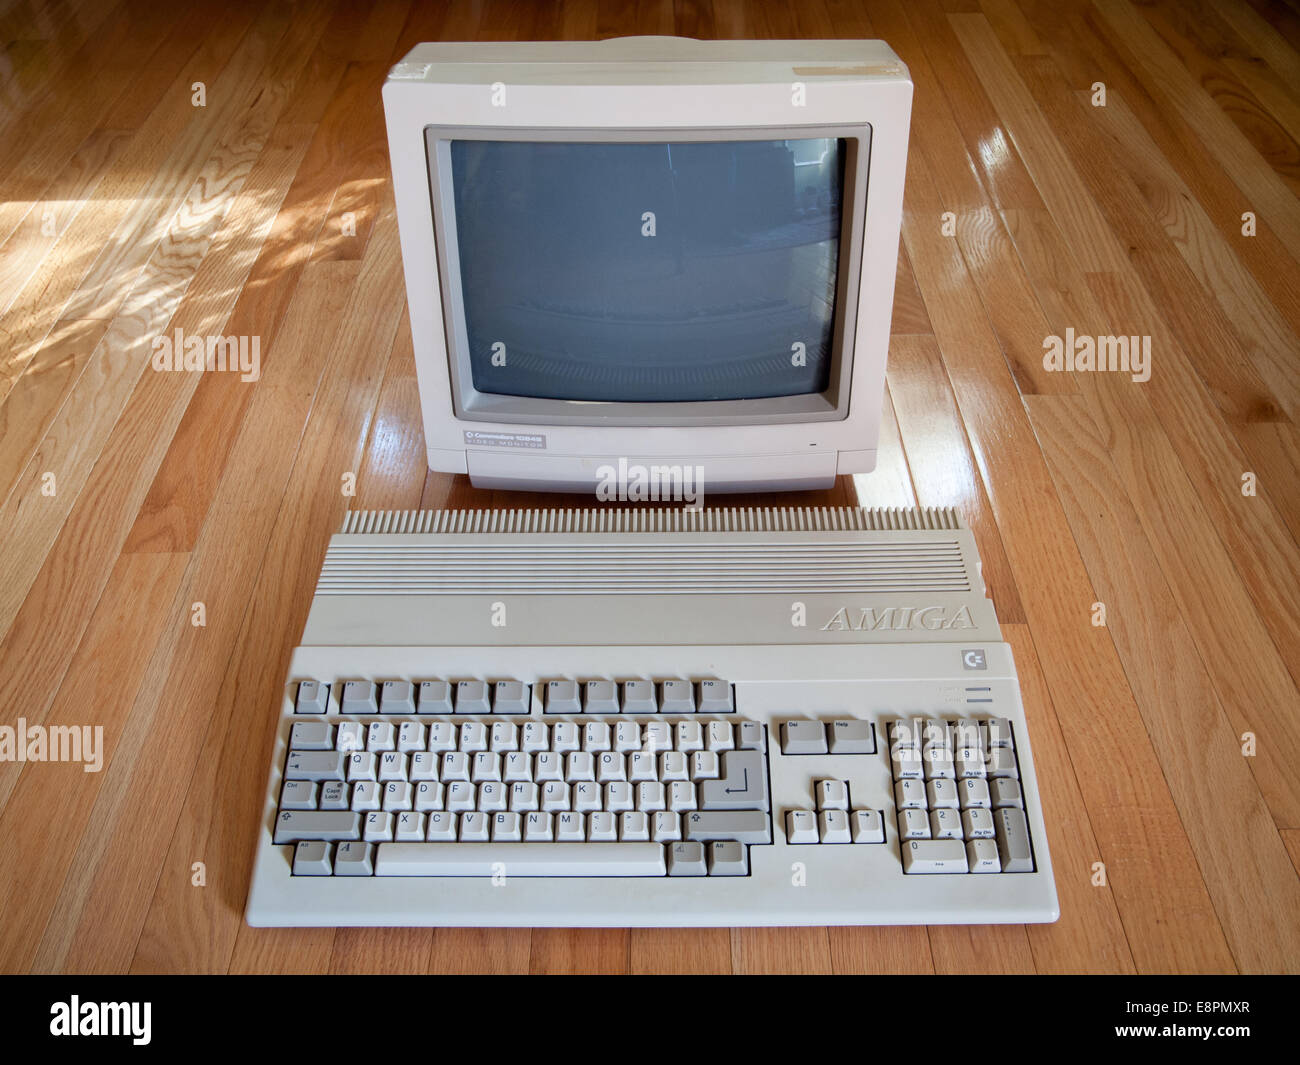 A view of a Commodore Amiga 500 computer and a Commodore 1084S